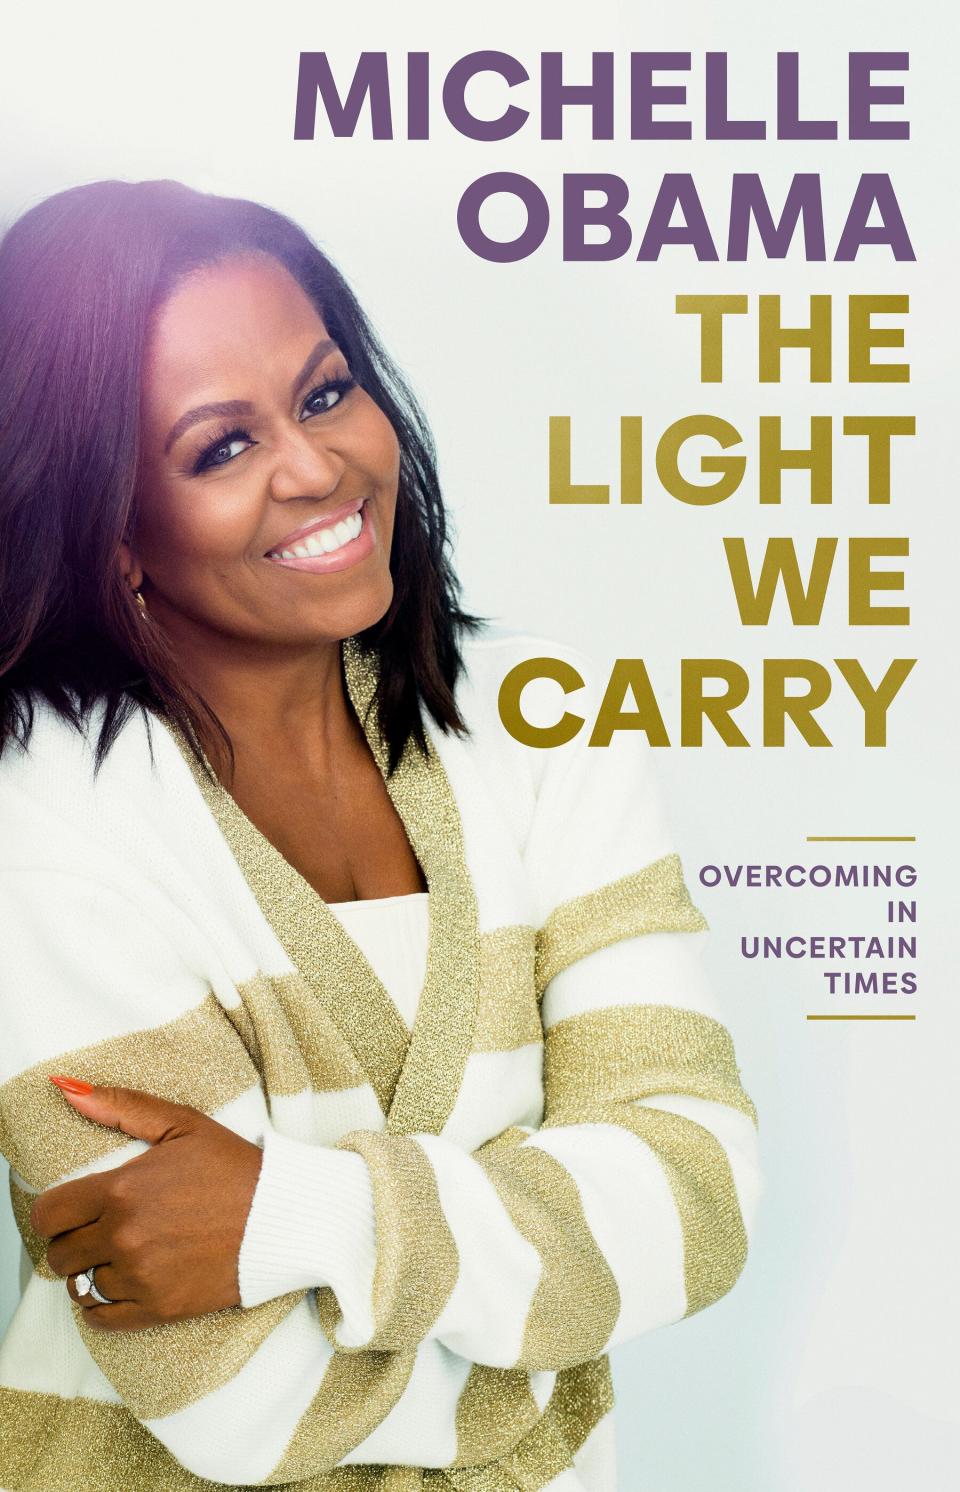 "The Light We Carry," by Michelle Obama.